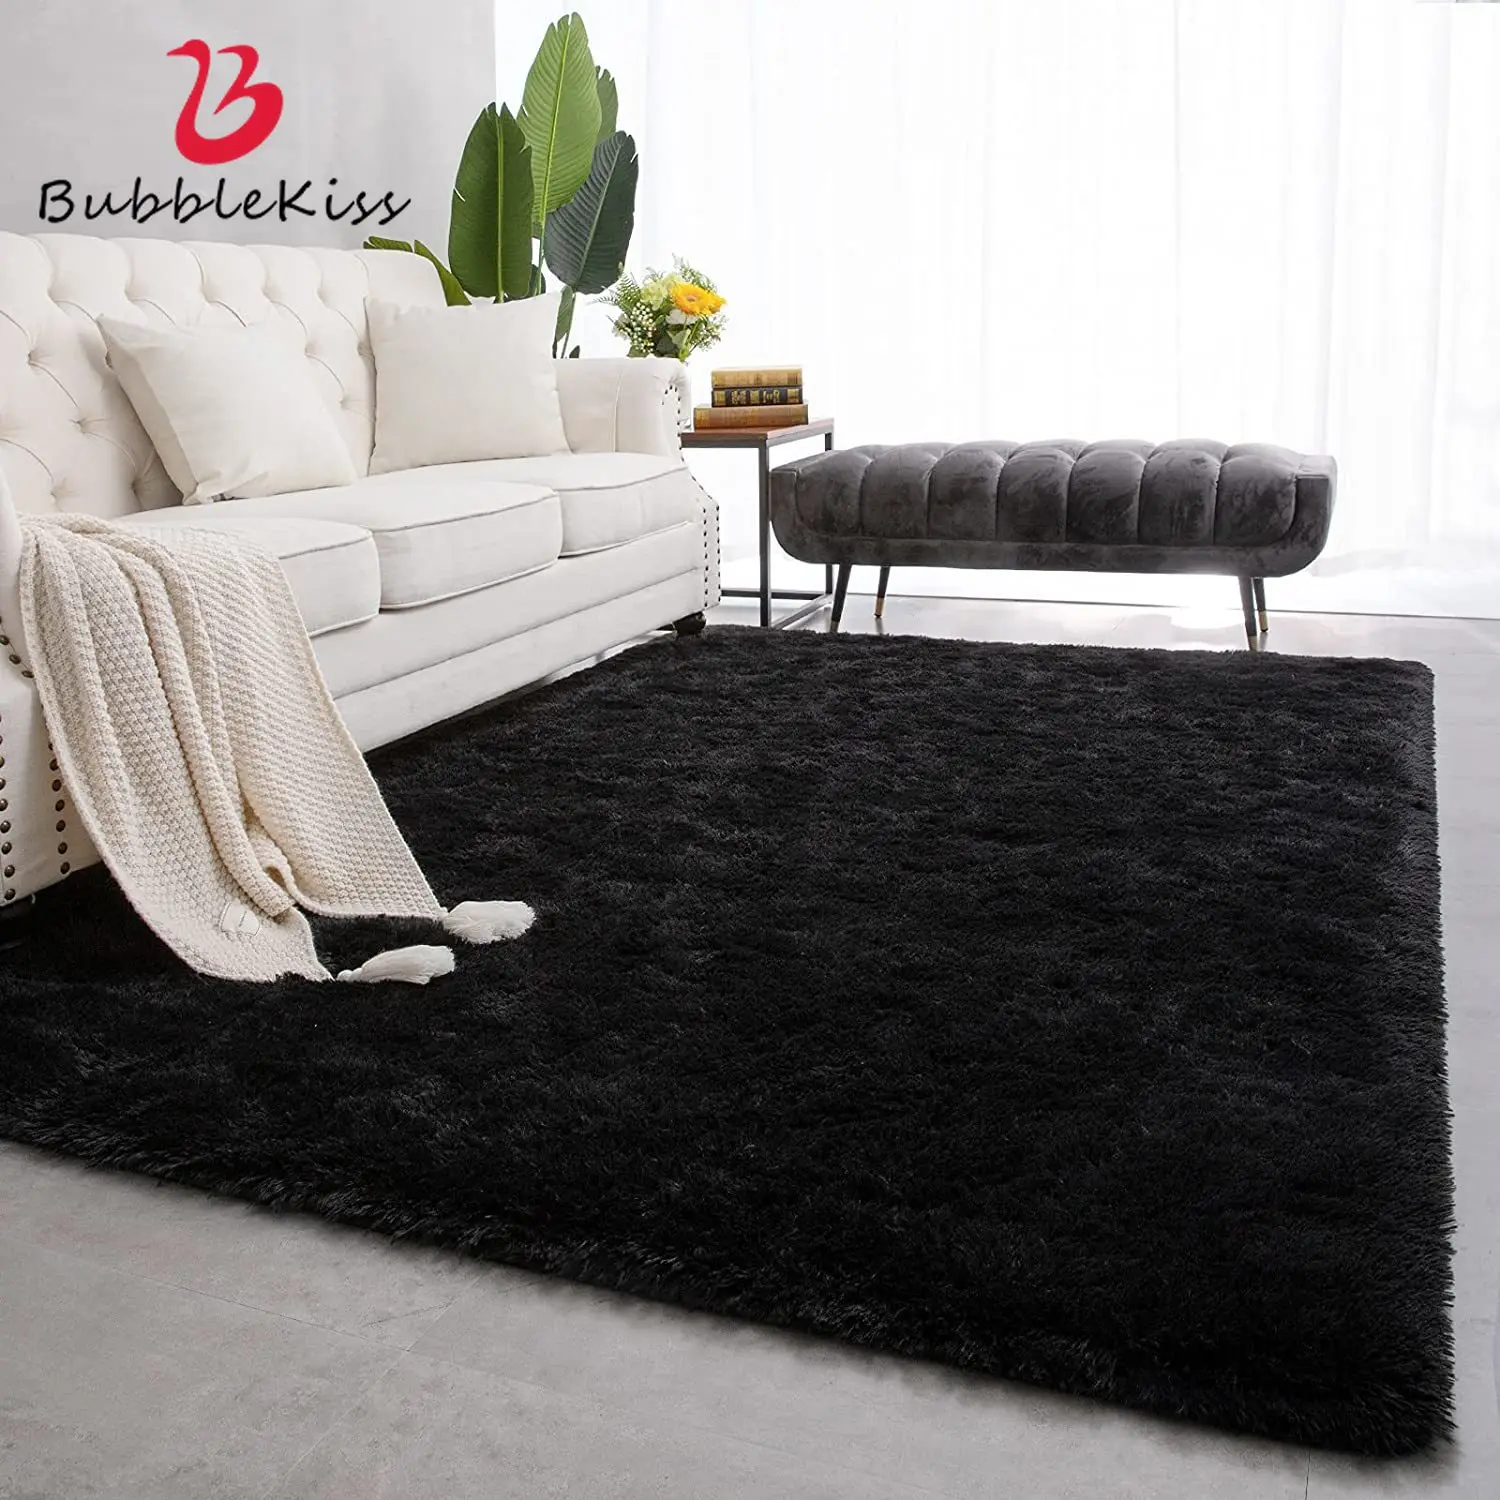 

Bubble Kiss Solid Thick Fluffy Carpets Living Room Decor Black Shaggy Area Rugs For Bedroom Bedside Kid Room Floor Mat Plush Rug